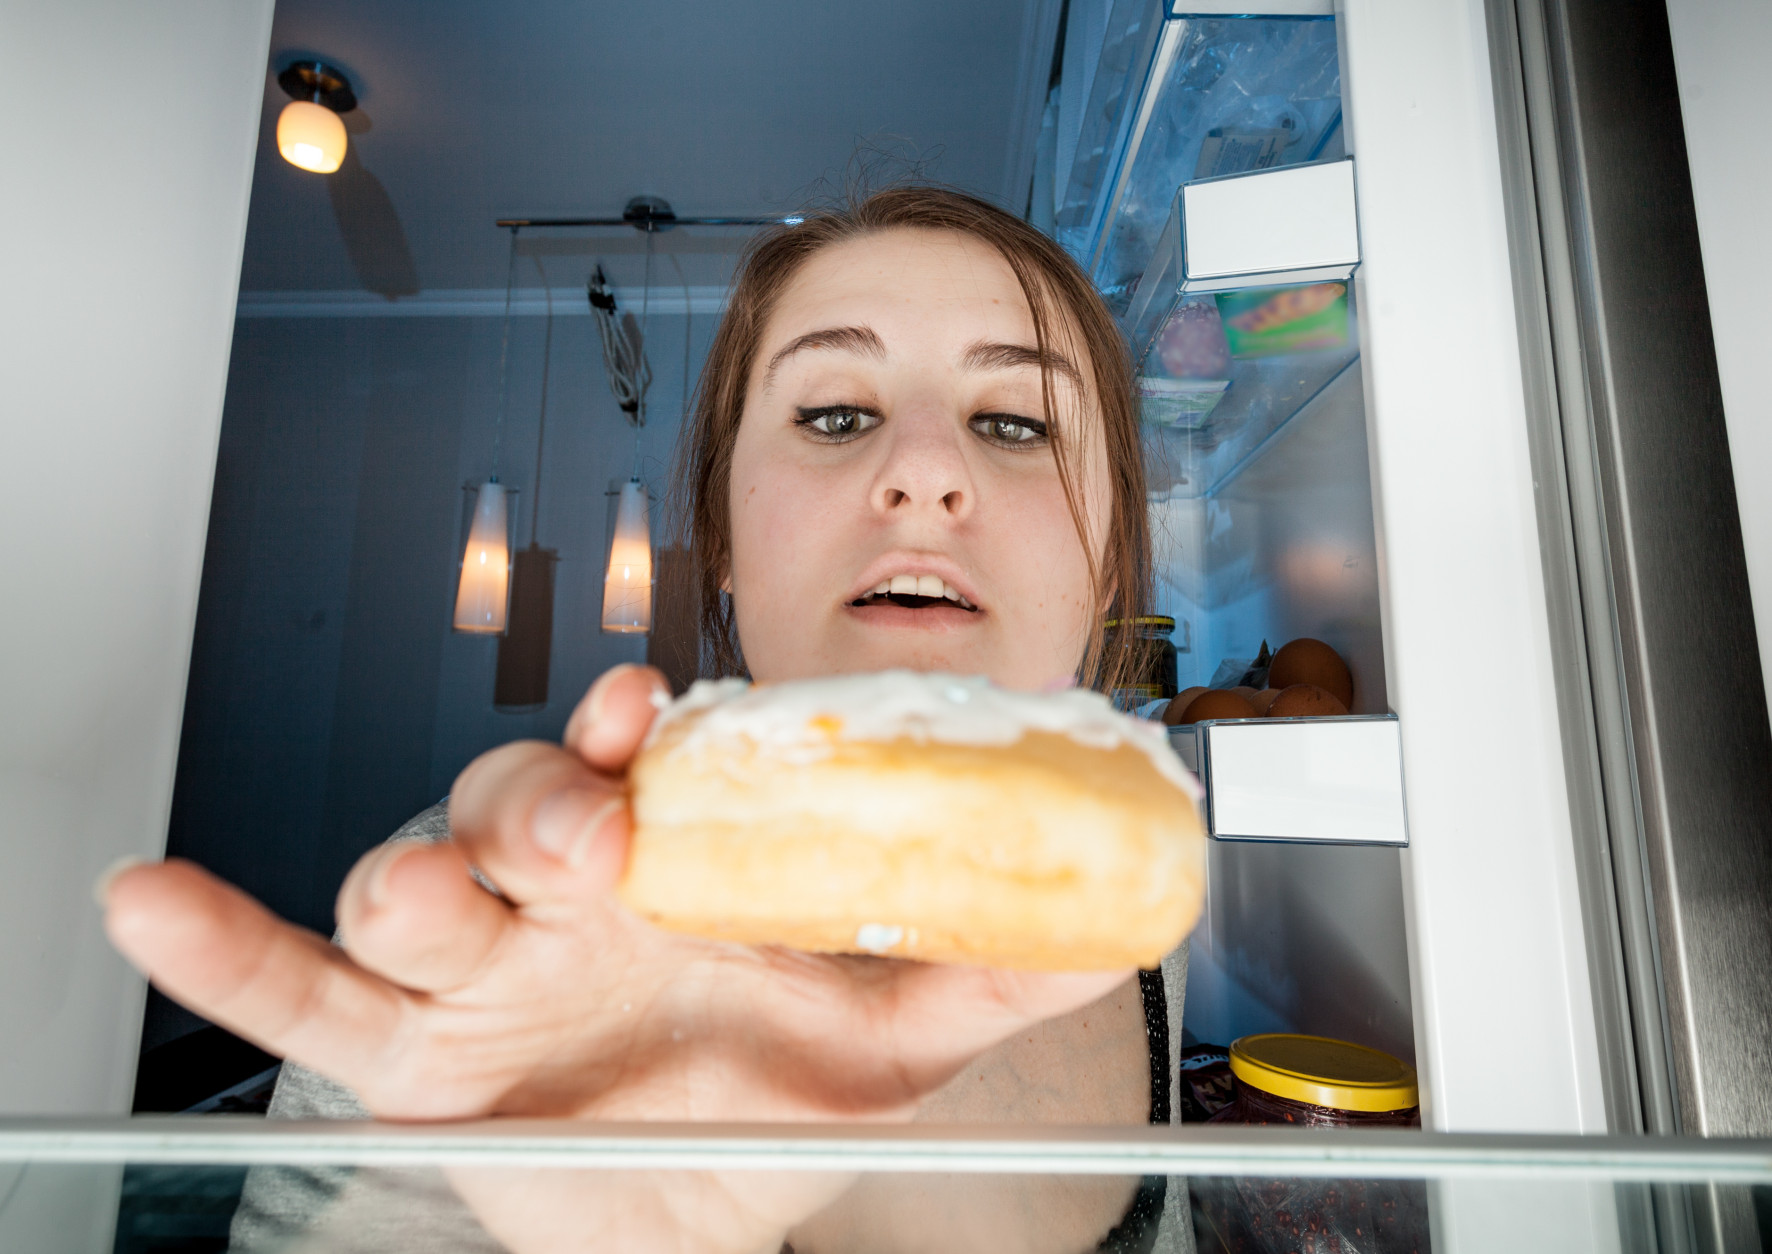 Whether it is a doughnut or candy or chips, you need to figure out what triggers your emotional eating. (Getty Images/iStockphoto/Artfoliophoto)